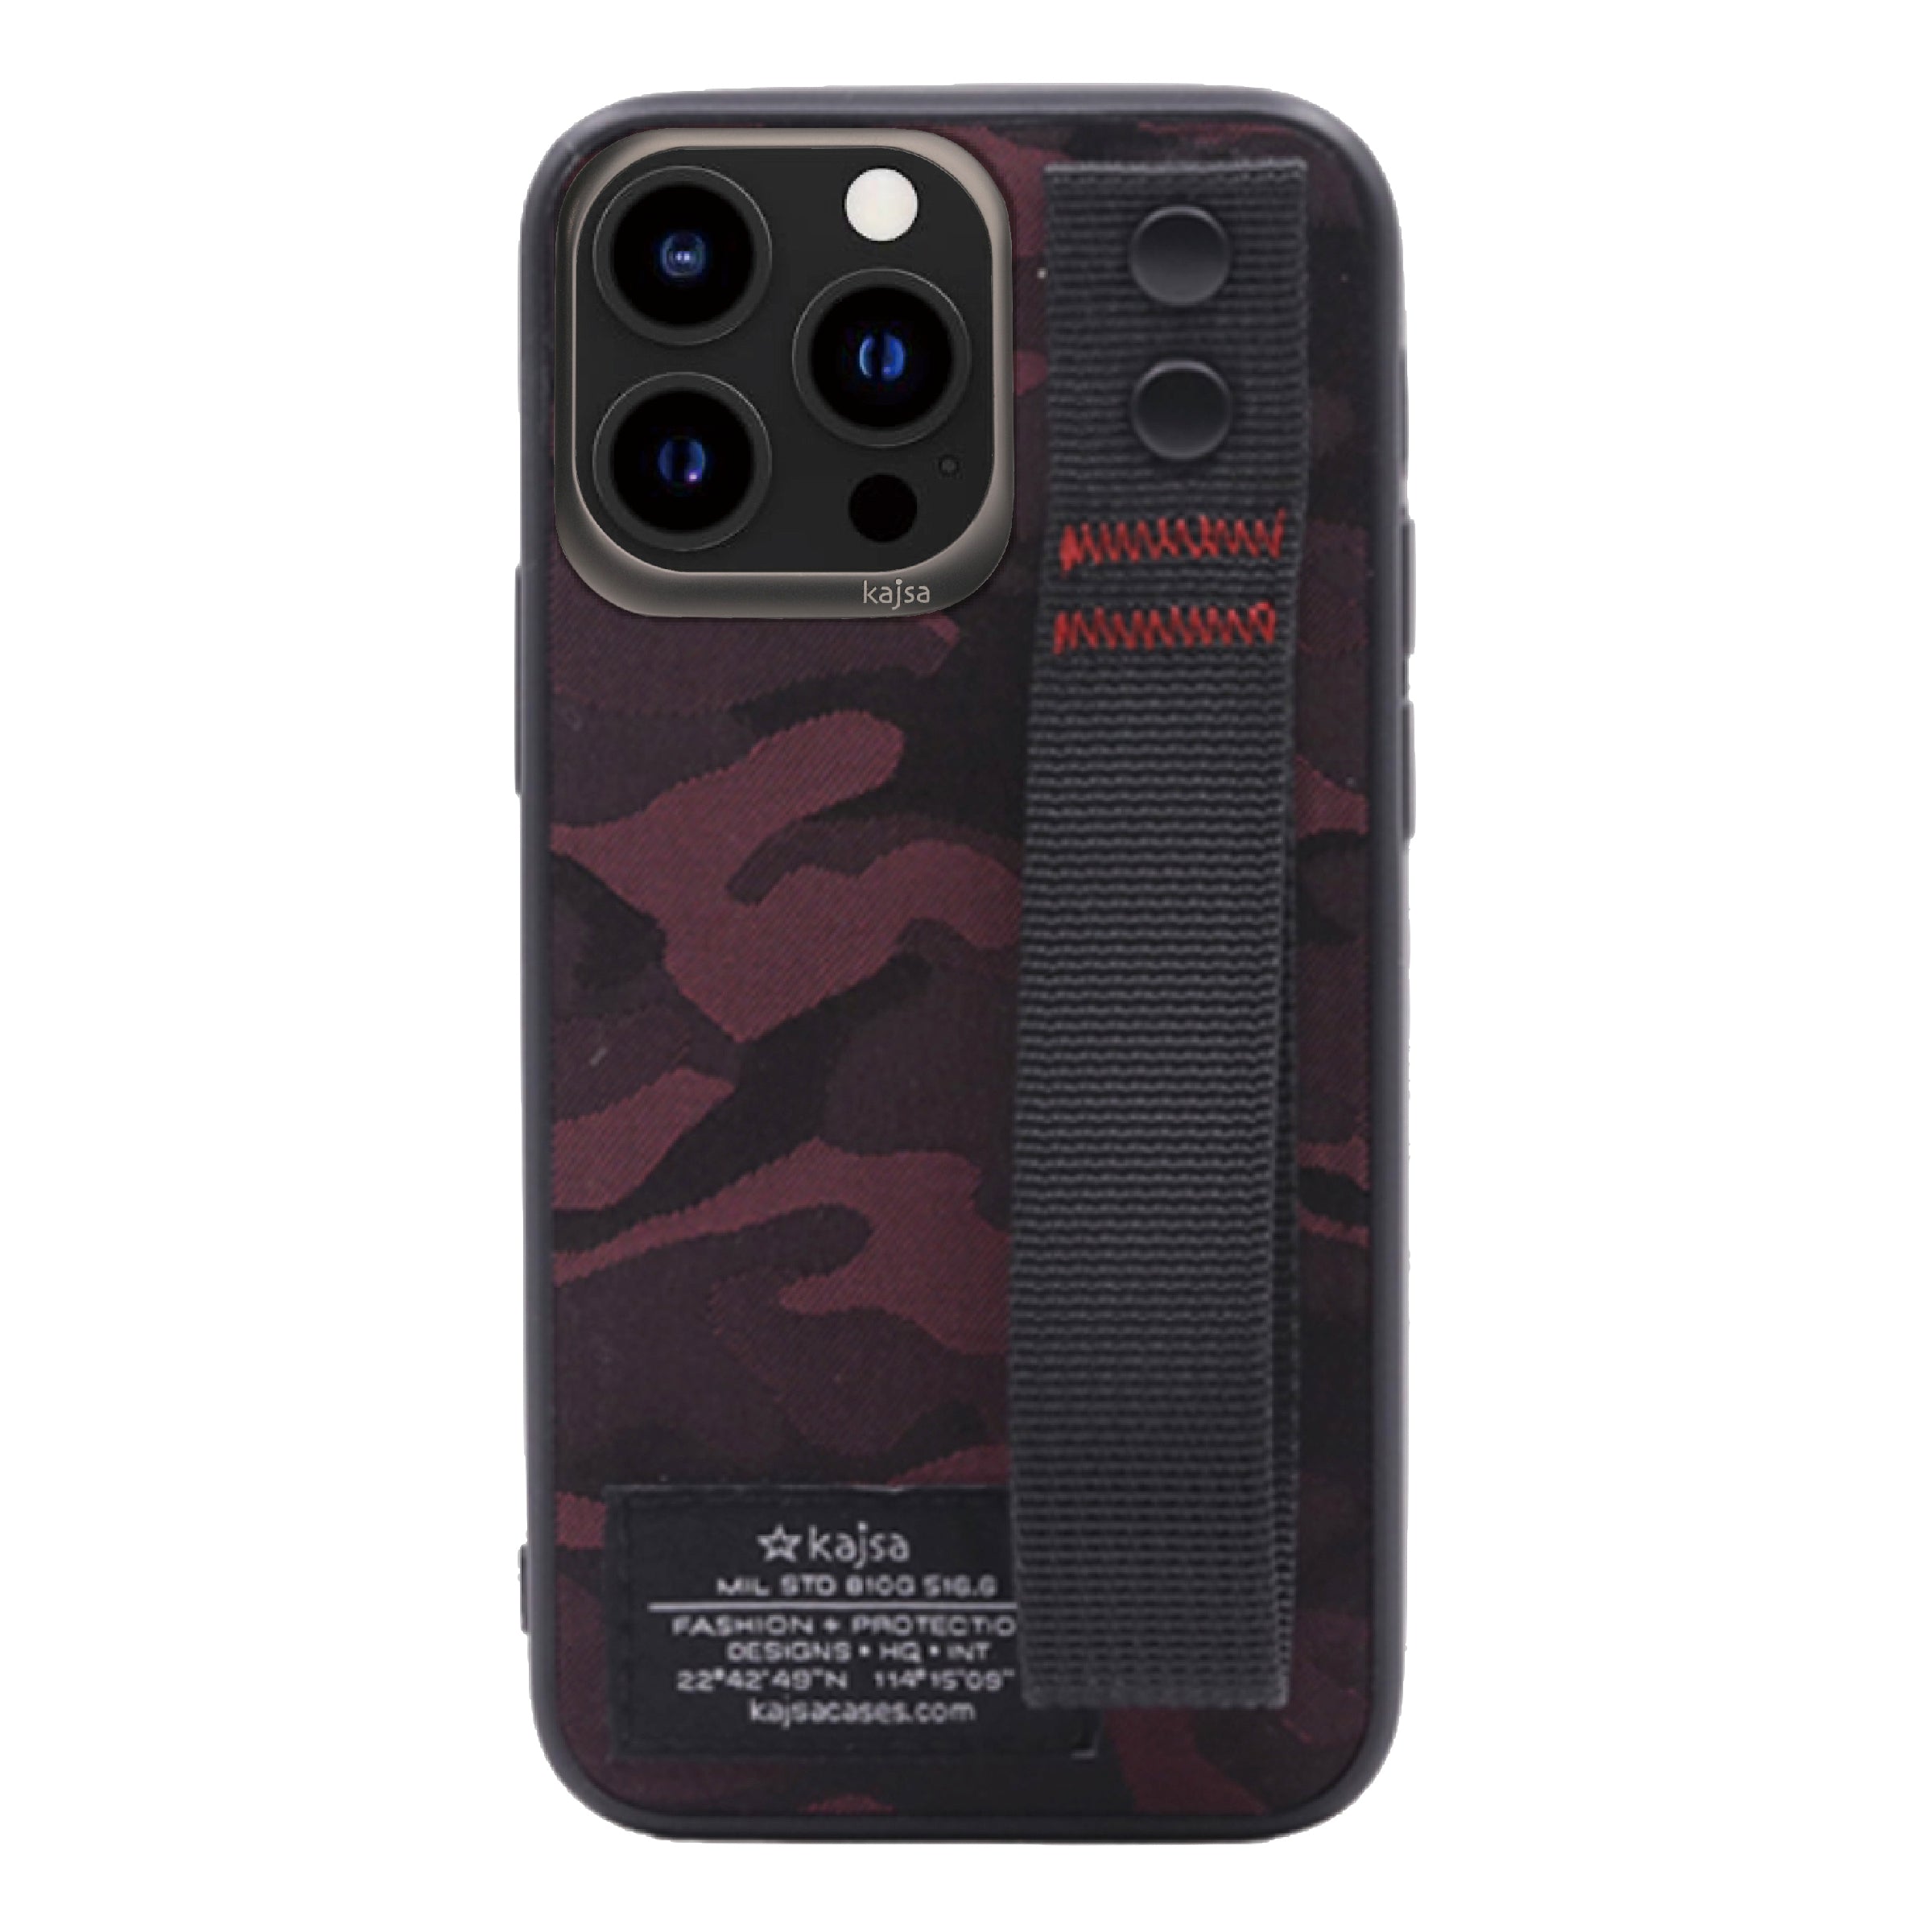 Outdoor Collection - Camo Satin Back Case for iPhone 13-Phone Case- phone case - phone cases- phone cover- iphone cover- iphone case- iphone cases- leather case- leather cases- DIYCASE - custom case - leather cover - hand strap case - croco pattern case - snake pattern case - carbon fiber phone case - phone case brand - unique phone case - high quality - phone case brand - protective case - buy phone case hong kong - online buy phone case - iphone‎手機殼 - 客製化手機殼 - samsung ‎手機殼 - 香港手機殼 - 買電話殼